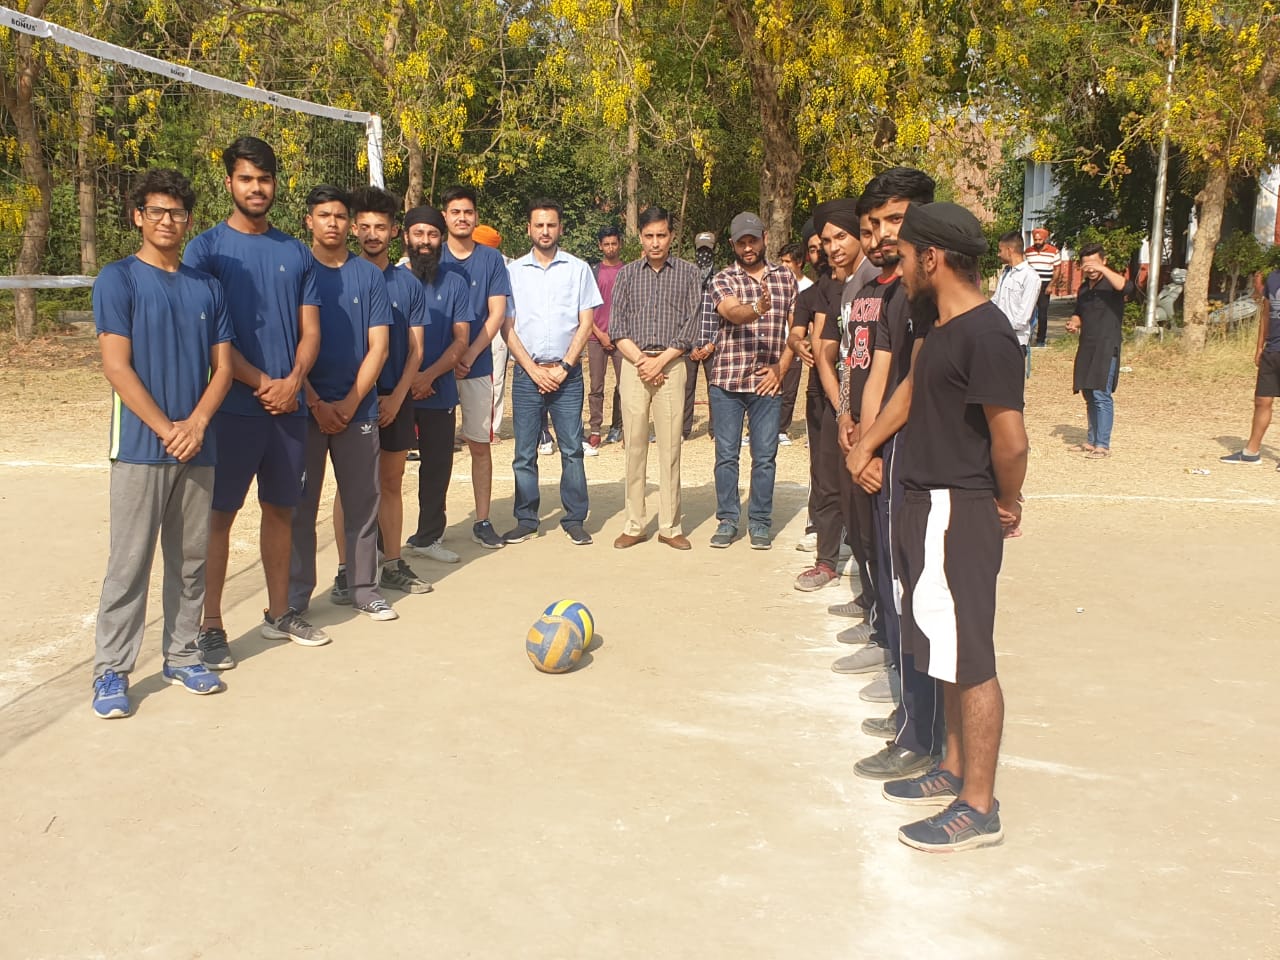 A Volleyball Tournament was organized at I.K. Gujral Punjab Technical University Amritsar Campus on 13th May 2022